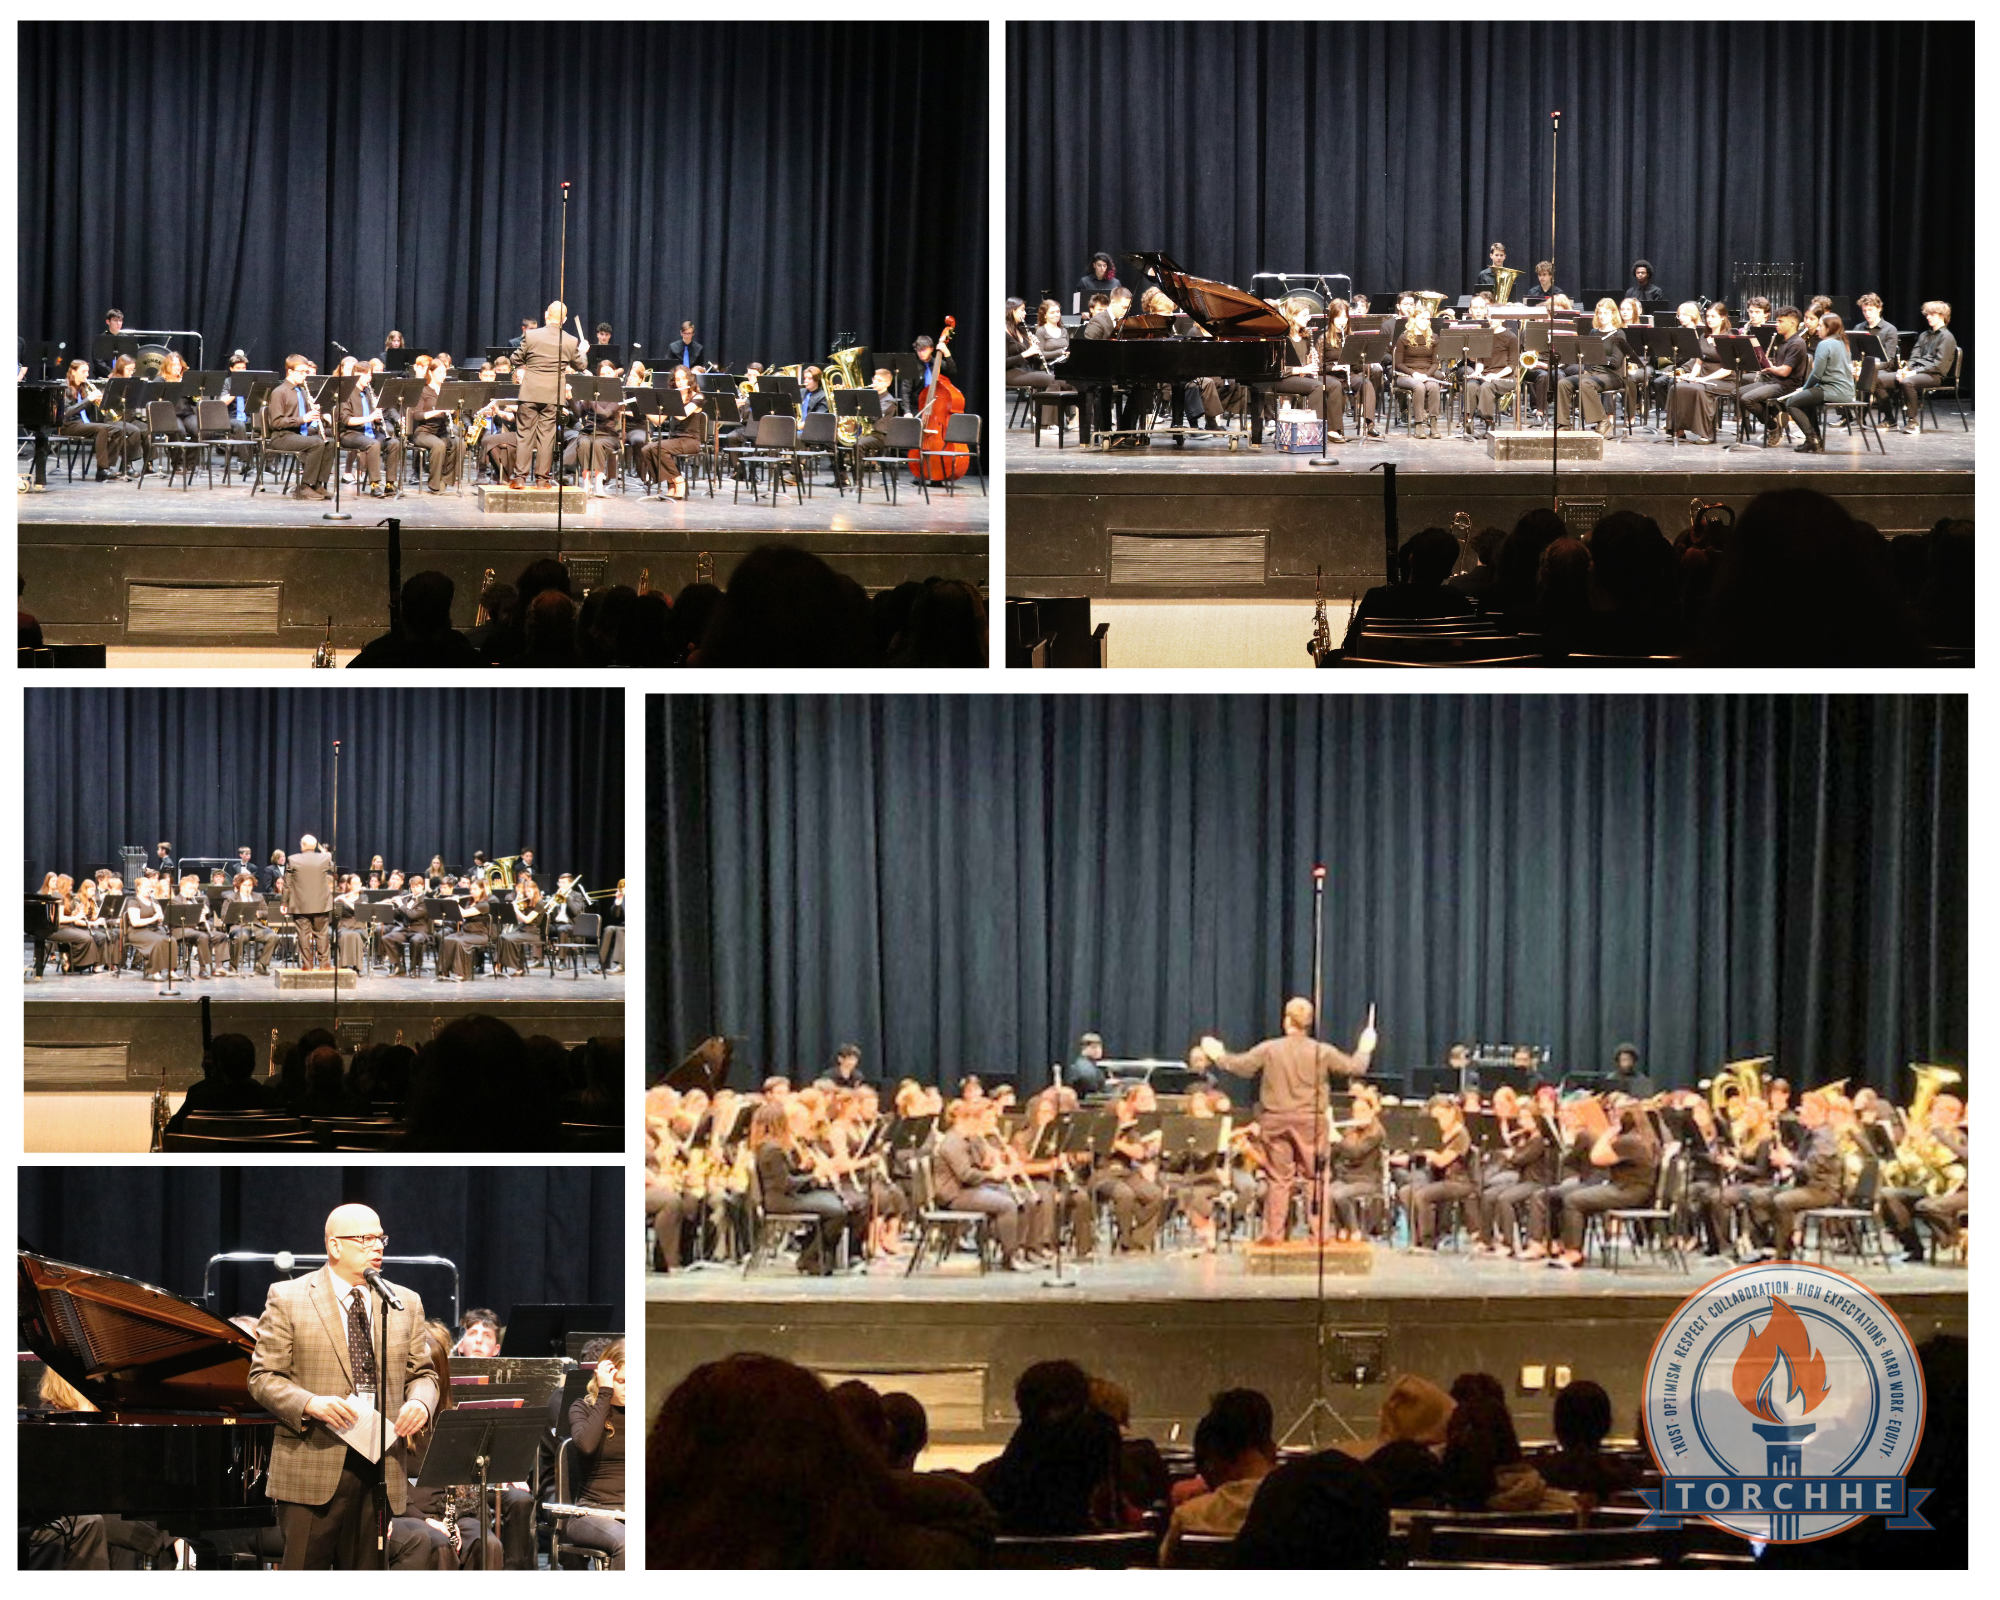 5-photo collage of student band performance